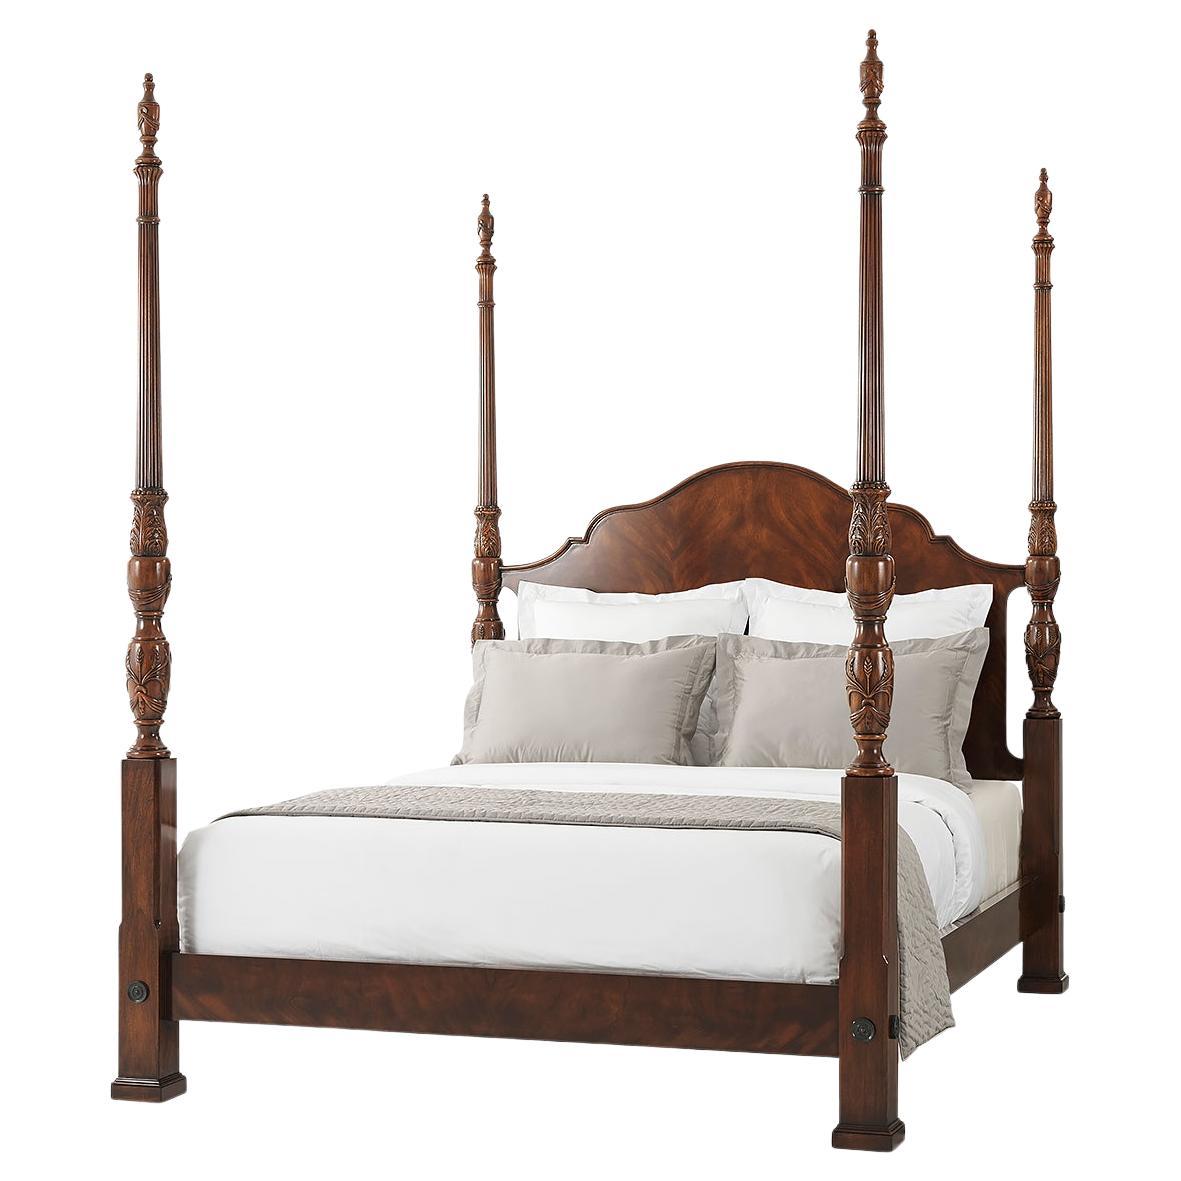 Carved Mahogany Four Post Bed, Queen